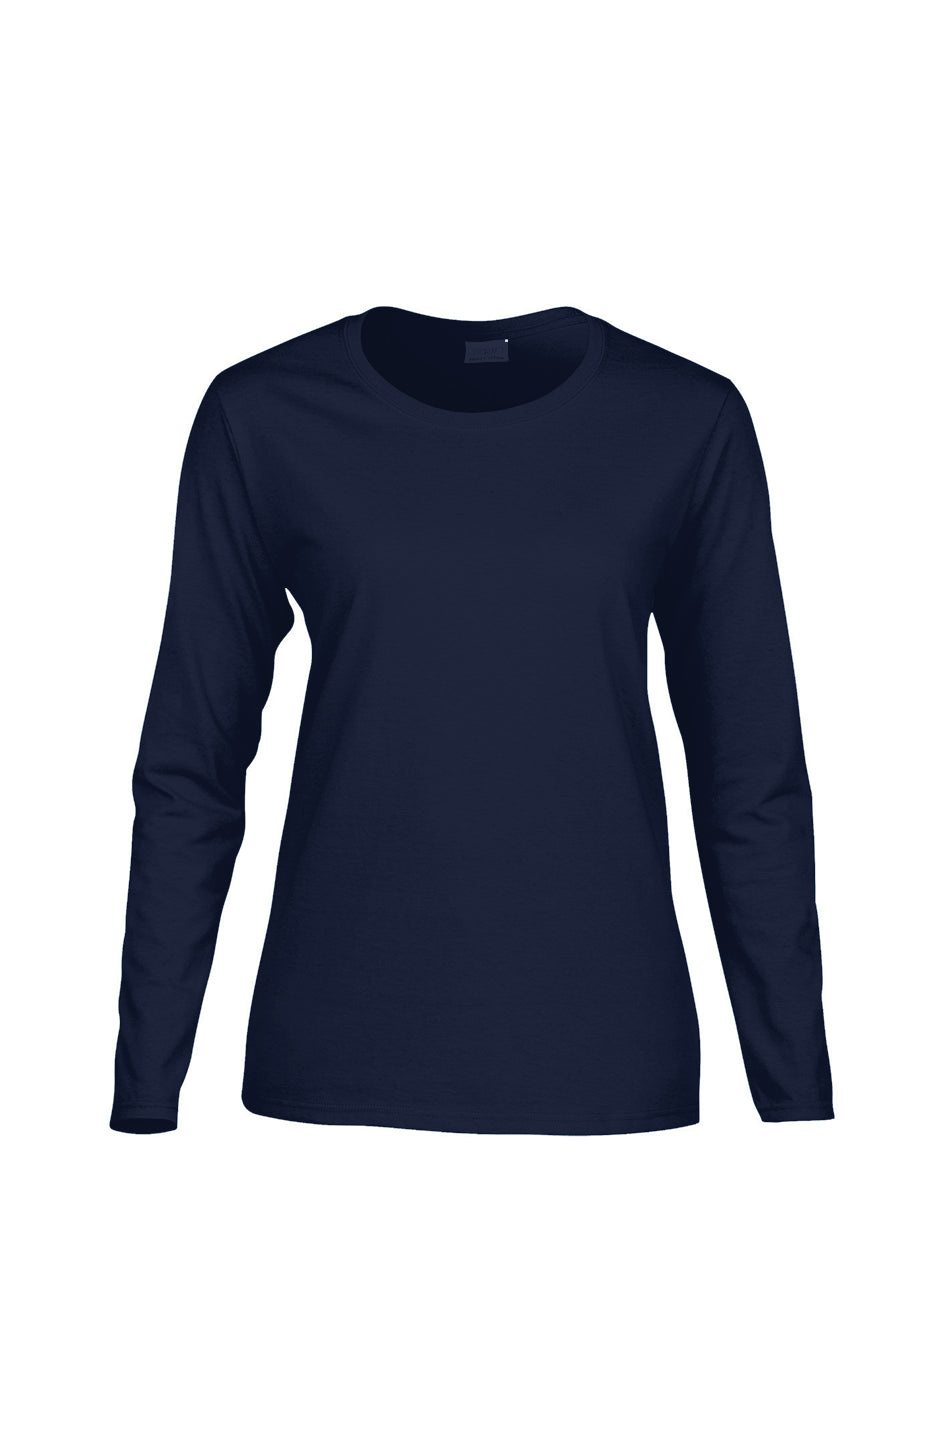 Personalized Women's Long-Sleeve T-Shirt - Navy Blue